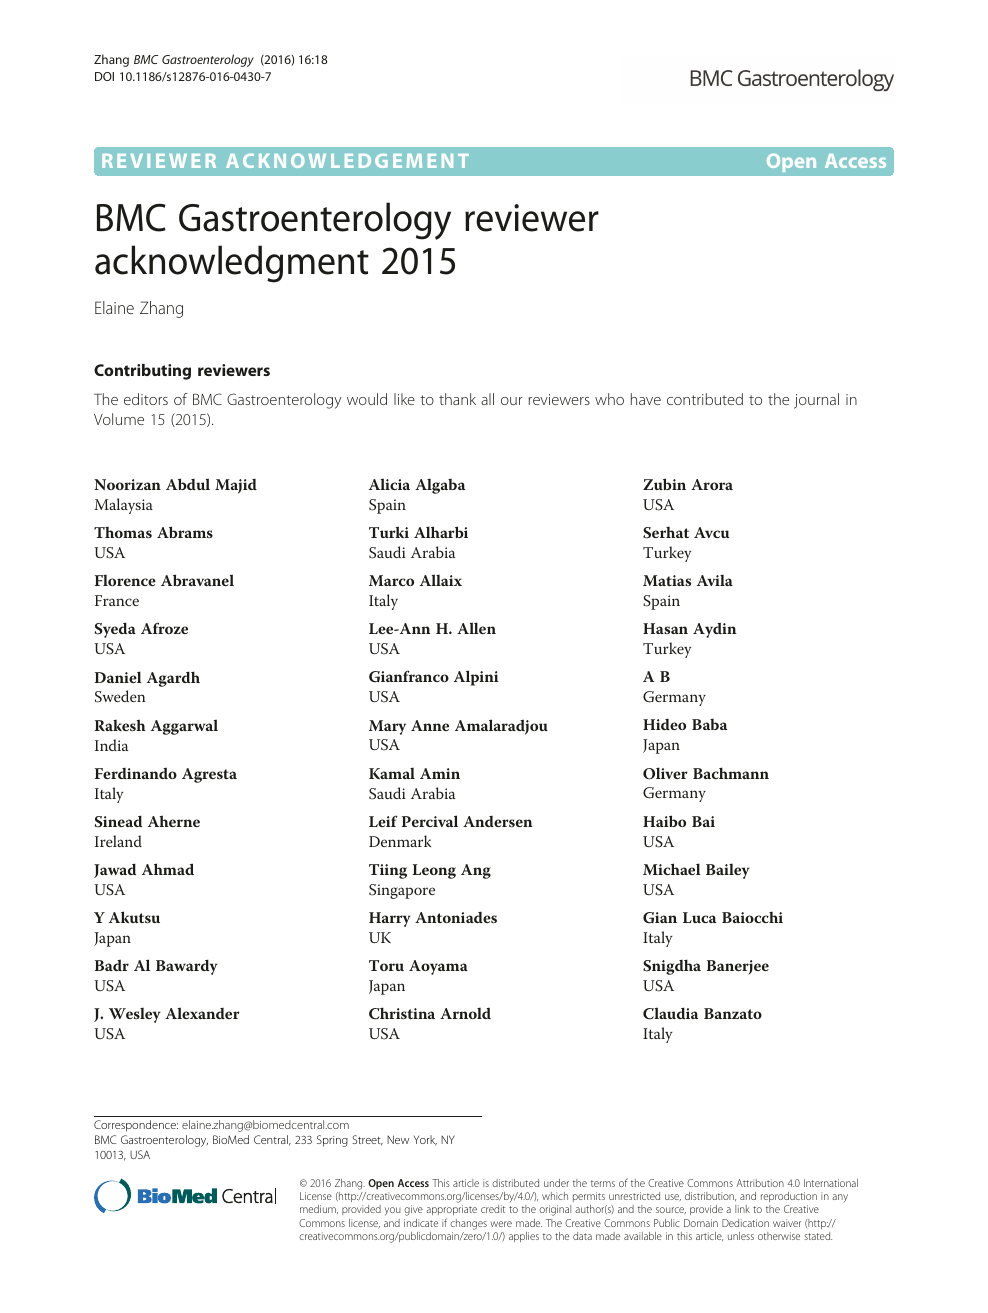 Bmc Gastroenterology Reviewer Acknowledgment 2015 Topic Of Research Paper In Clinical Medicine Download Scholarly Article Pdf And Read For Free On Cyberleninka Open Science Hub Dr rakesh kalapala is the director of endoscopy (center for obesity and metabolic therapy) at aig hospitals, gachibowli, hyderabad. cyberleninka